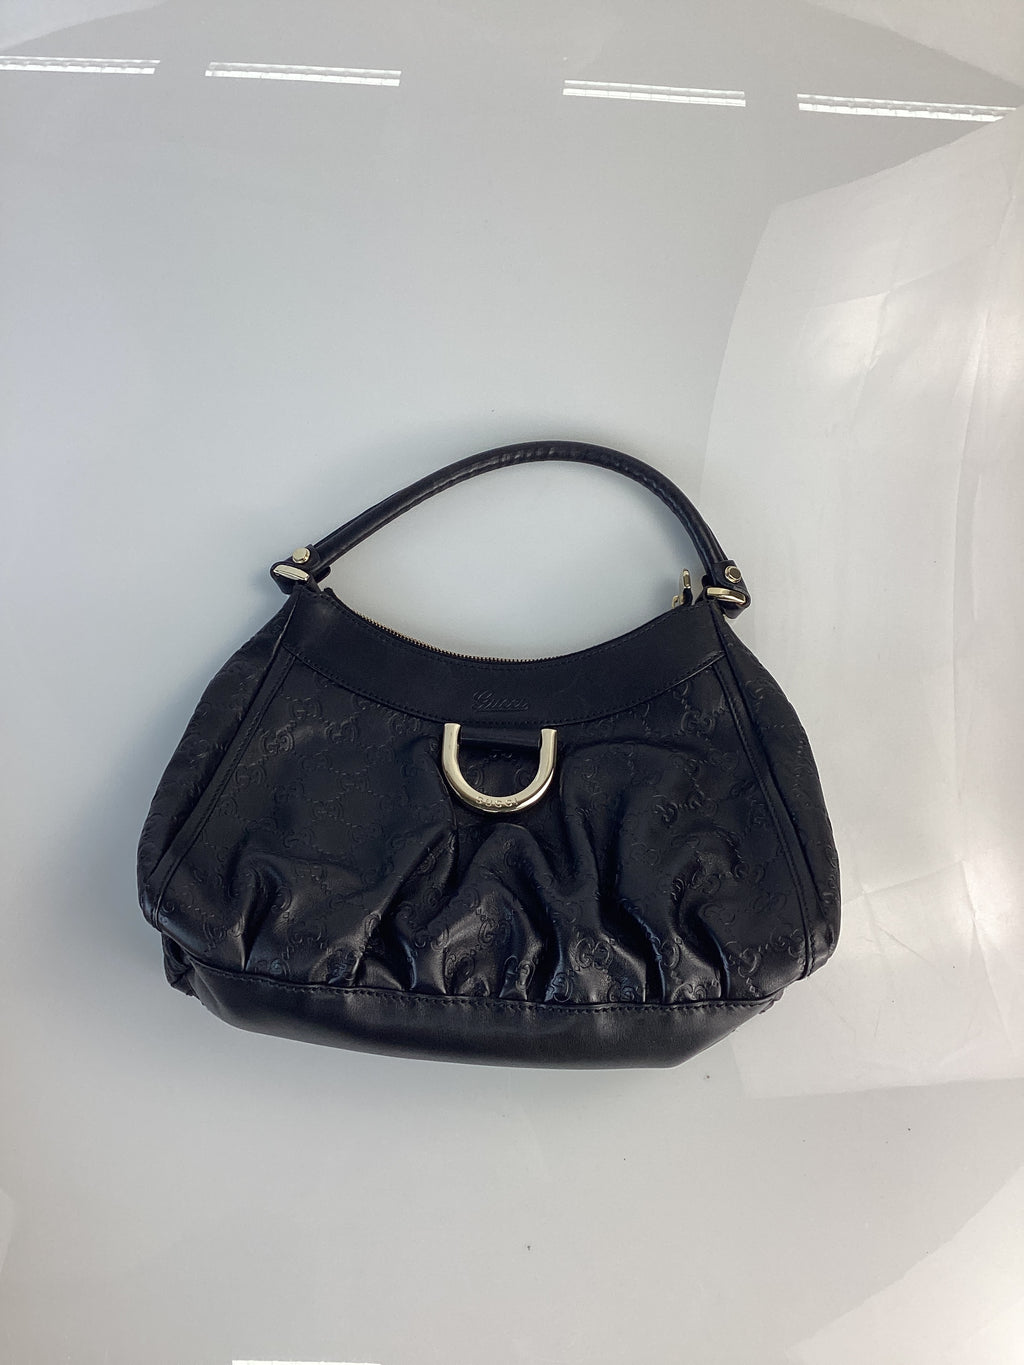 PRELOVED Guccii Black Guccisima Leather Abbey D-Ring Shoulder Bag CW89M6H 041524 B